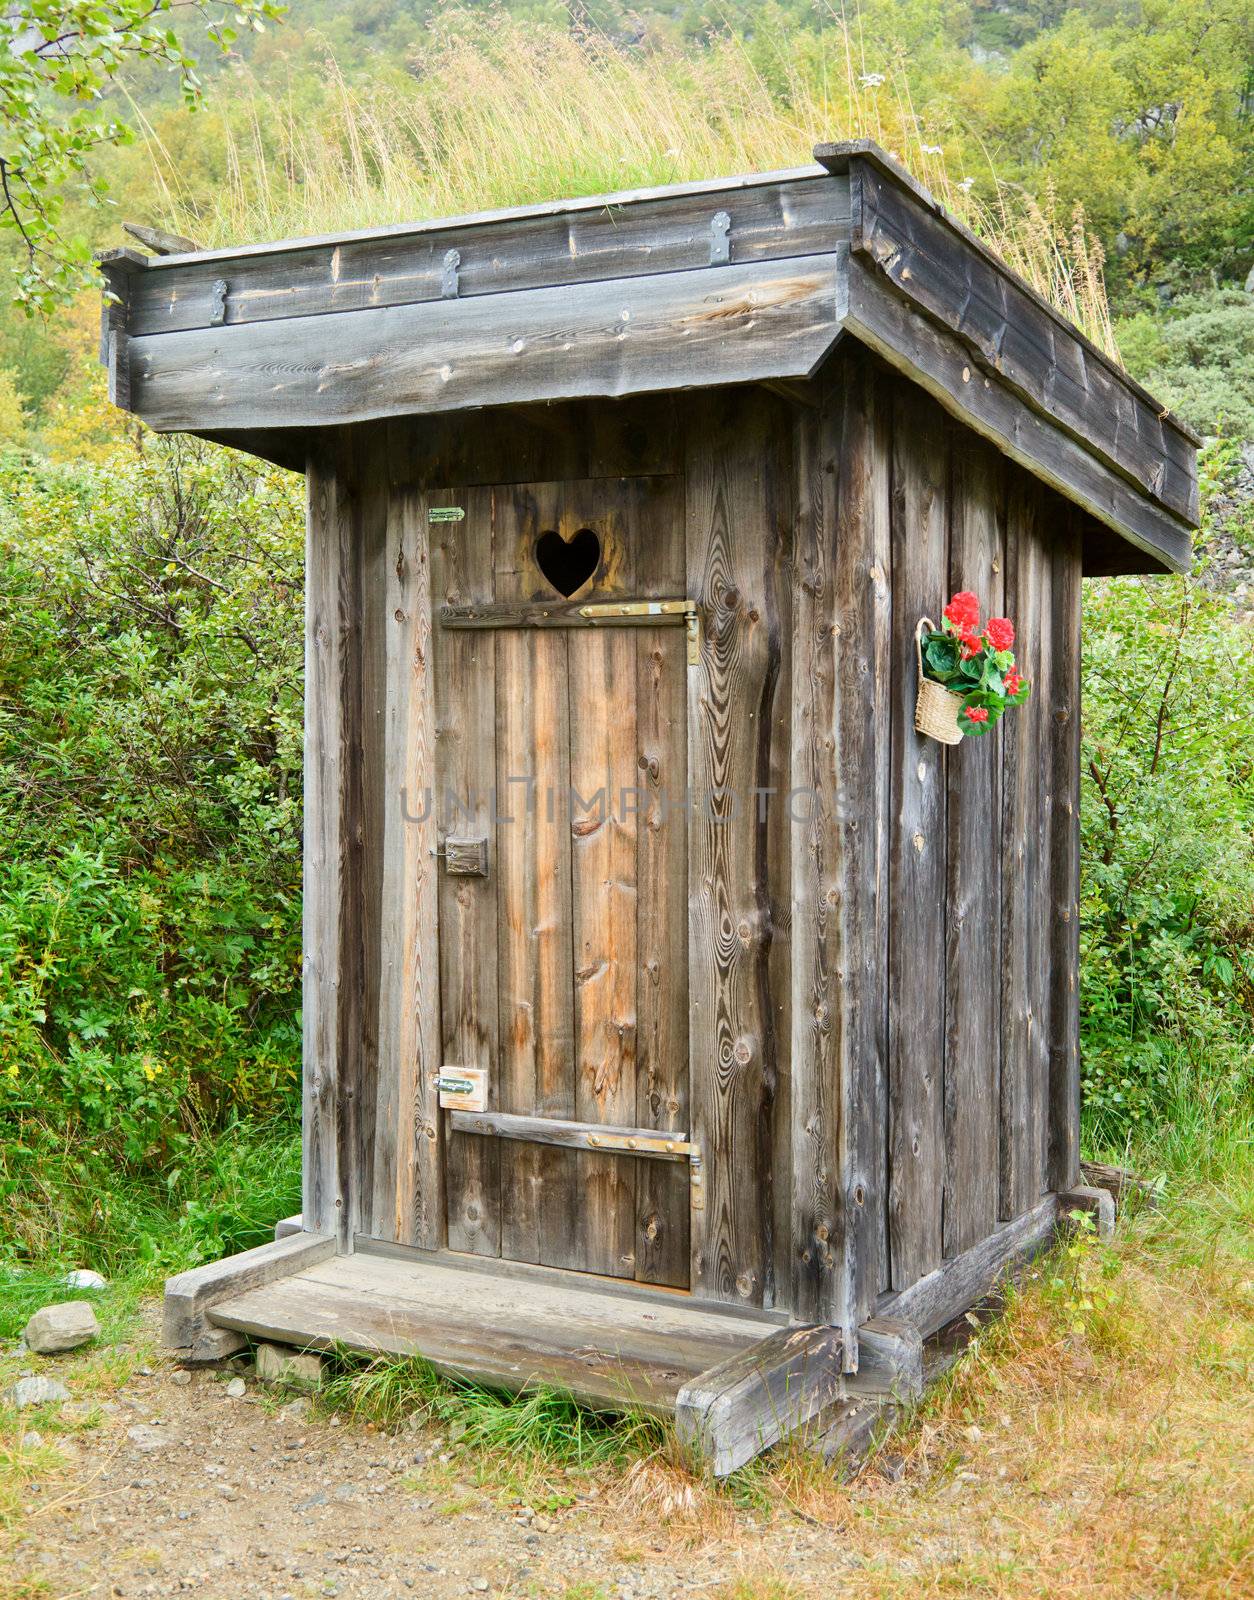 Old wooden outhouse in Norway